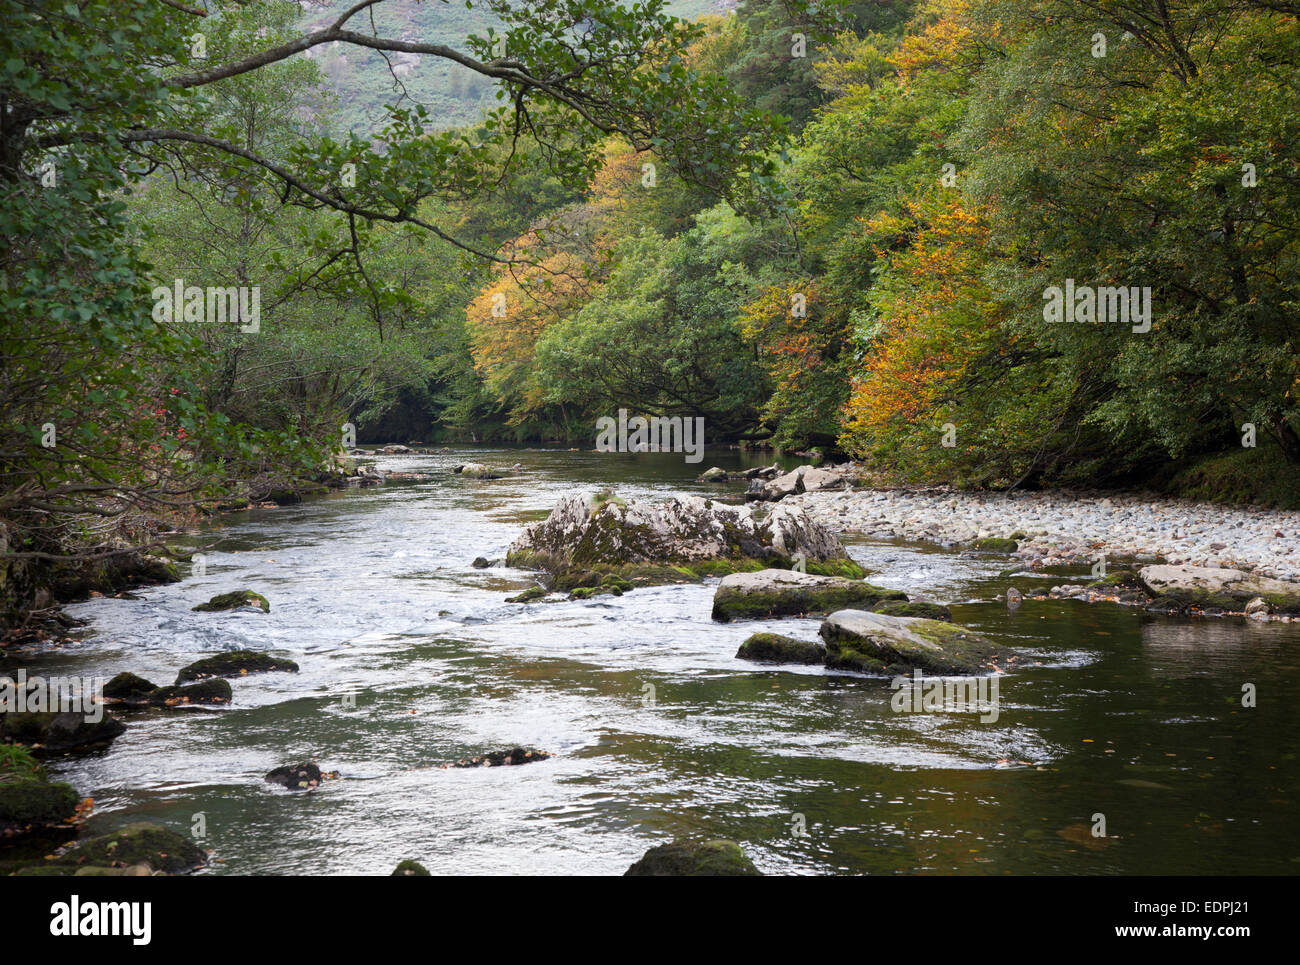 The River Glaslyn runs through boulder rapids in the Aberglaslyn Pass near Beddgelert in North Wales,UK Stock Photo